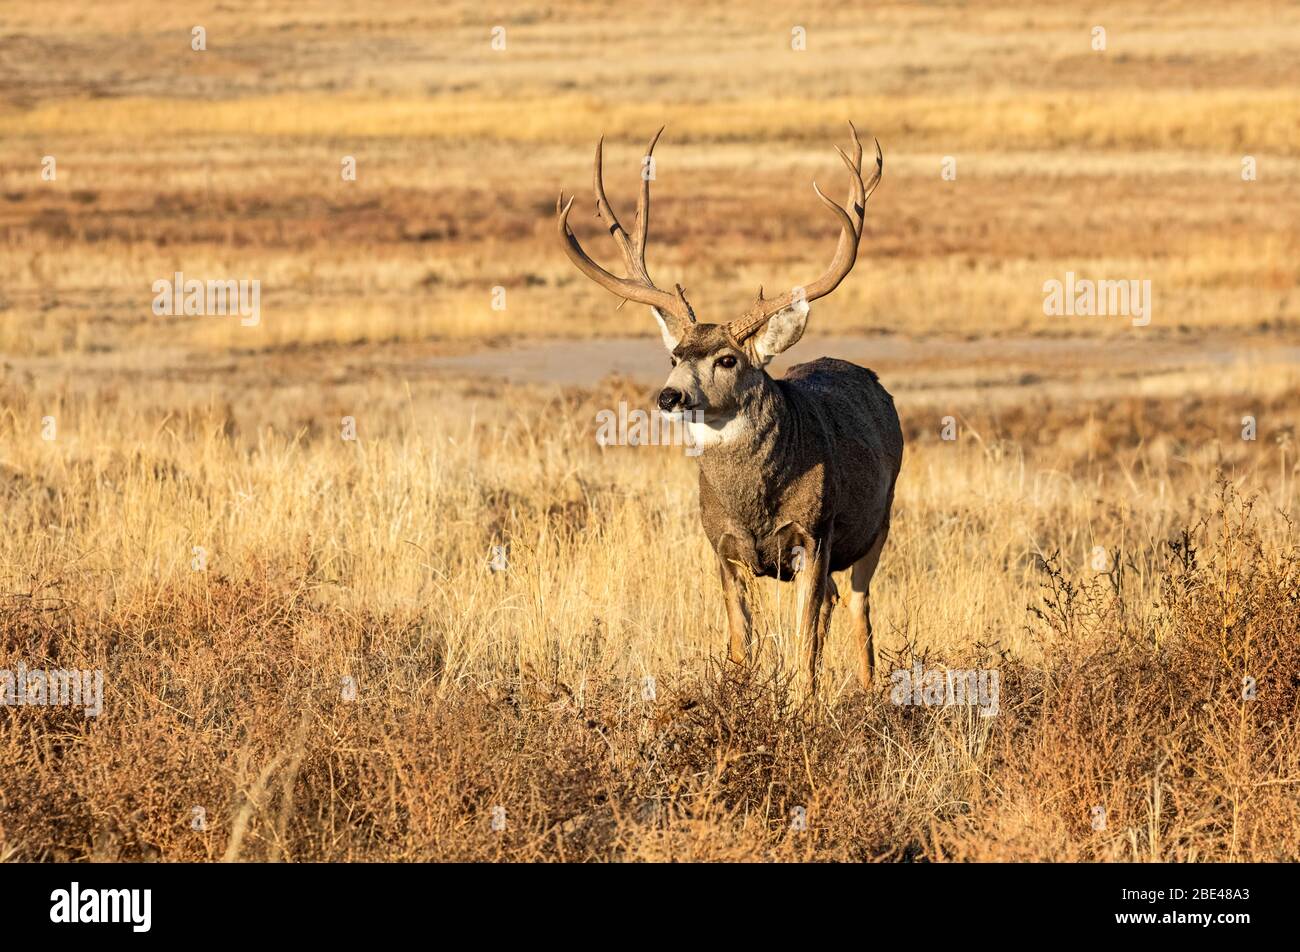 Mule deer (Odocoileus hemionus) stag with antlers standing in a golden field; Steamboat Springs, Colorado, United States of America Stock Photo